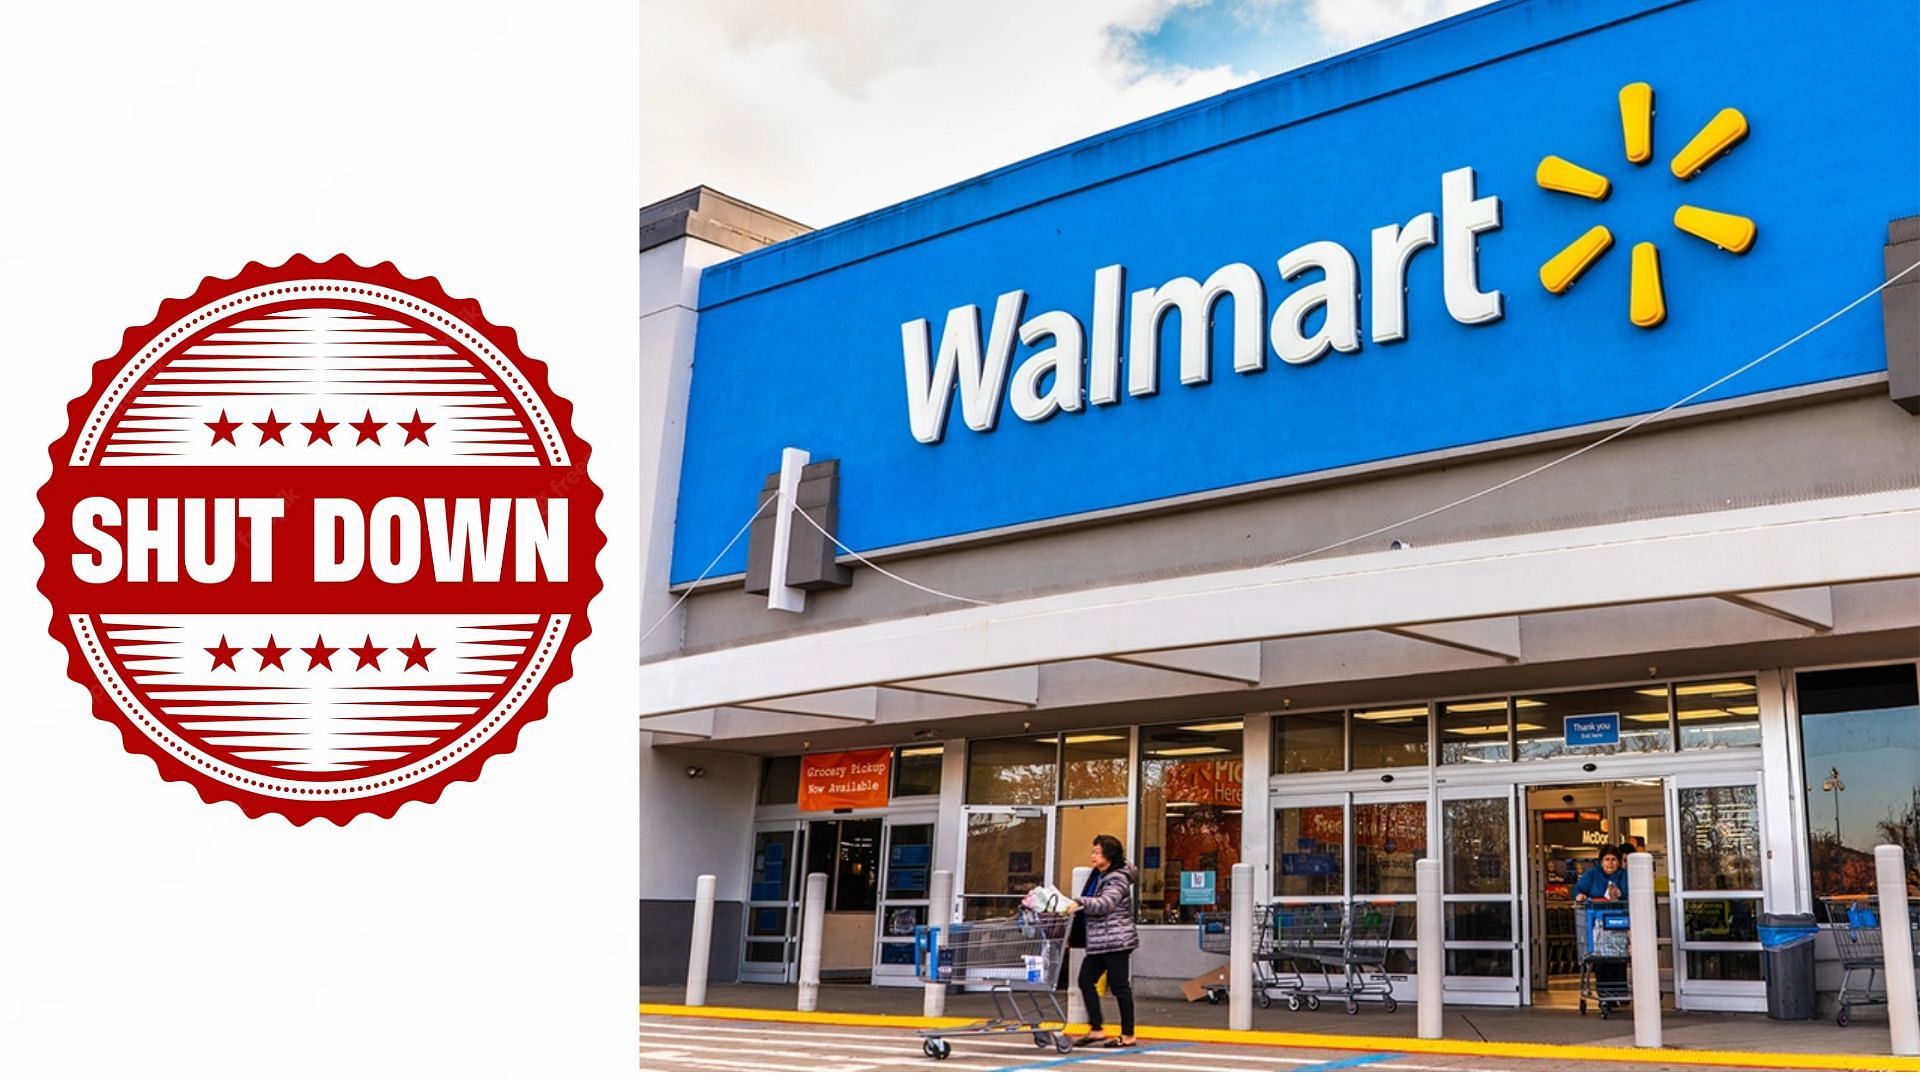 Walmart is shutting down three stores in Homewood, Plainfield, and Lincolnwood as they failed to meet financial expectations (Image via Sundry Photography/Getty Images)